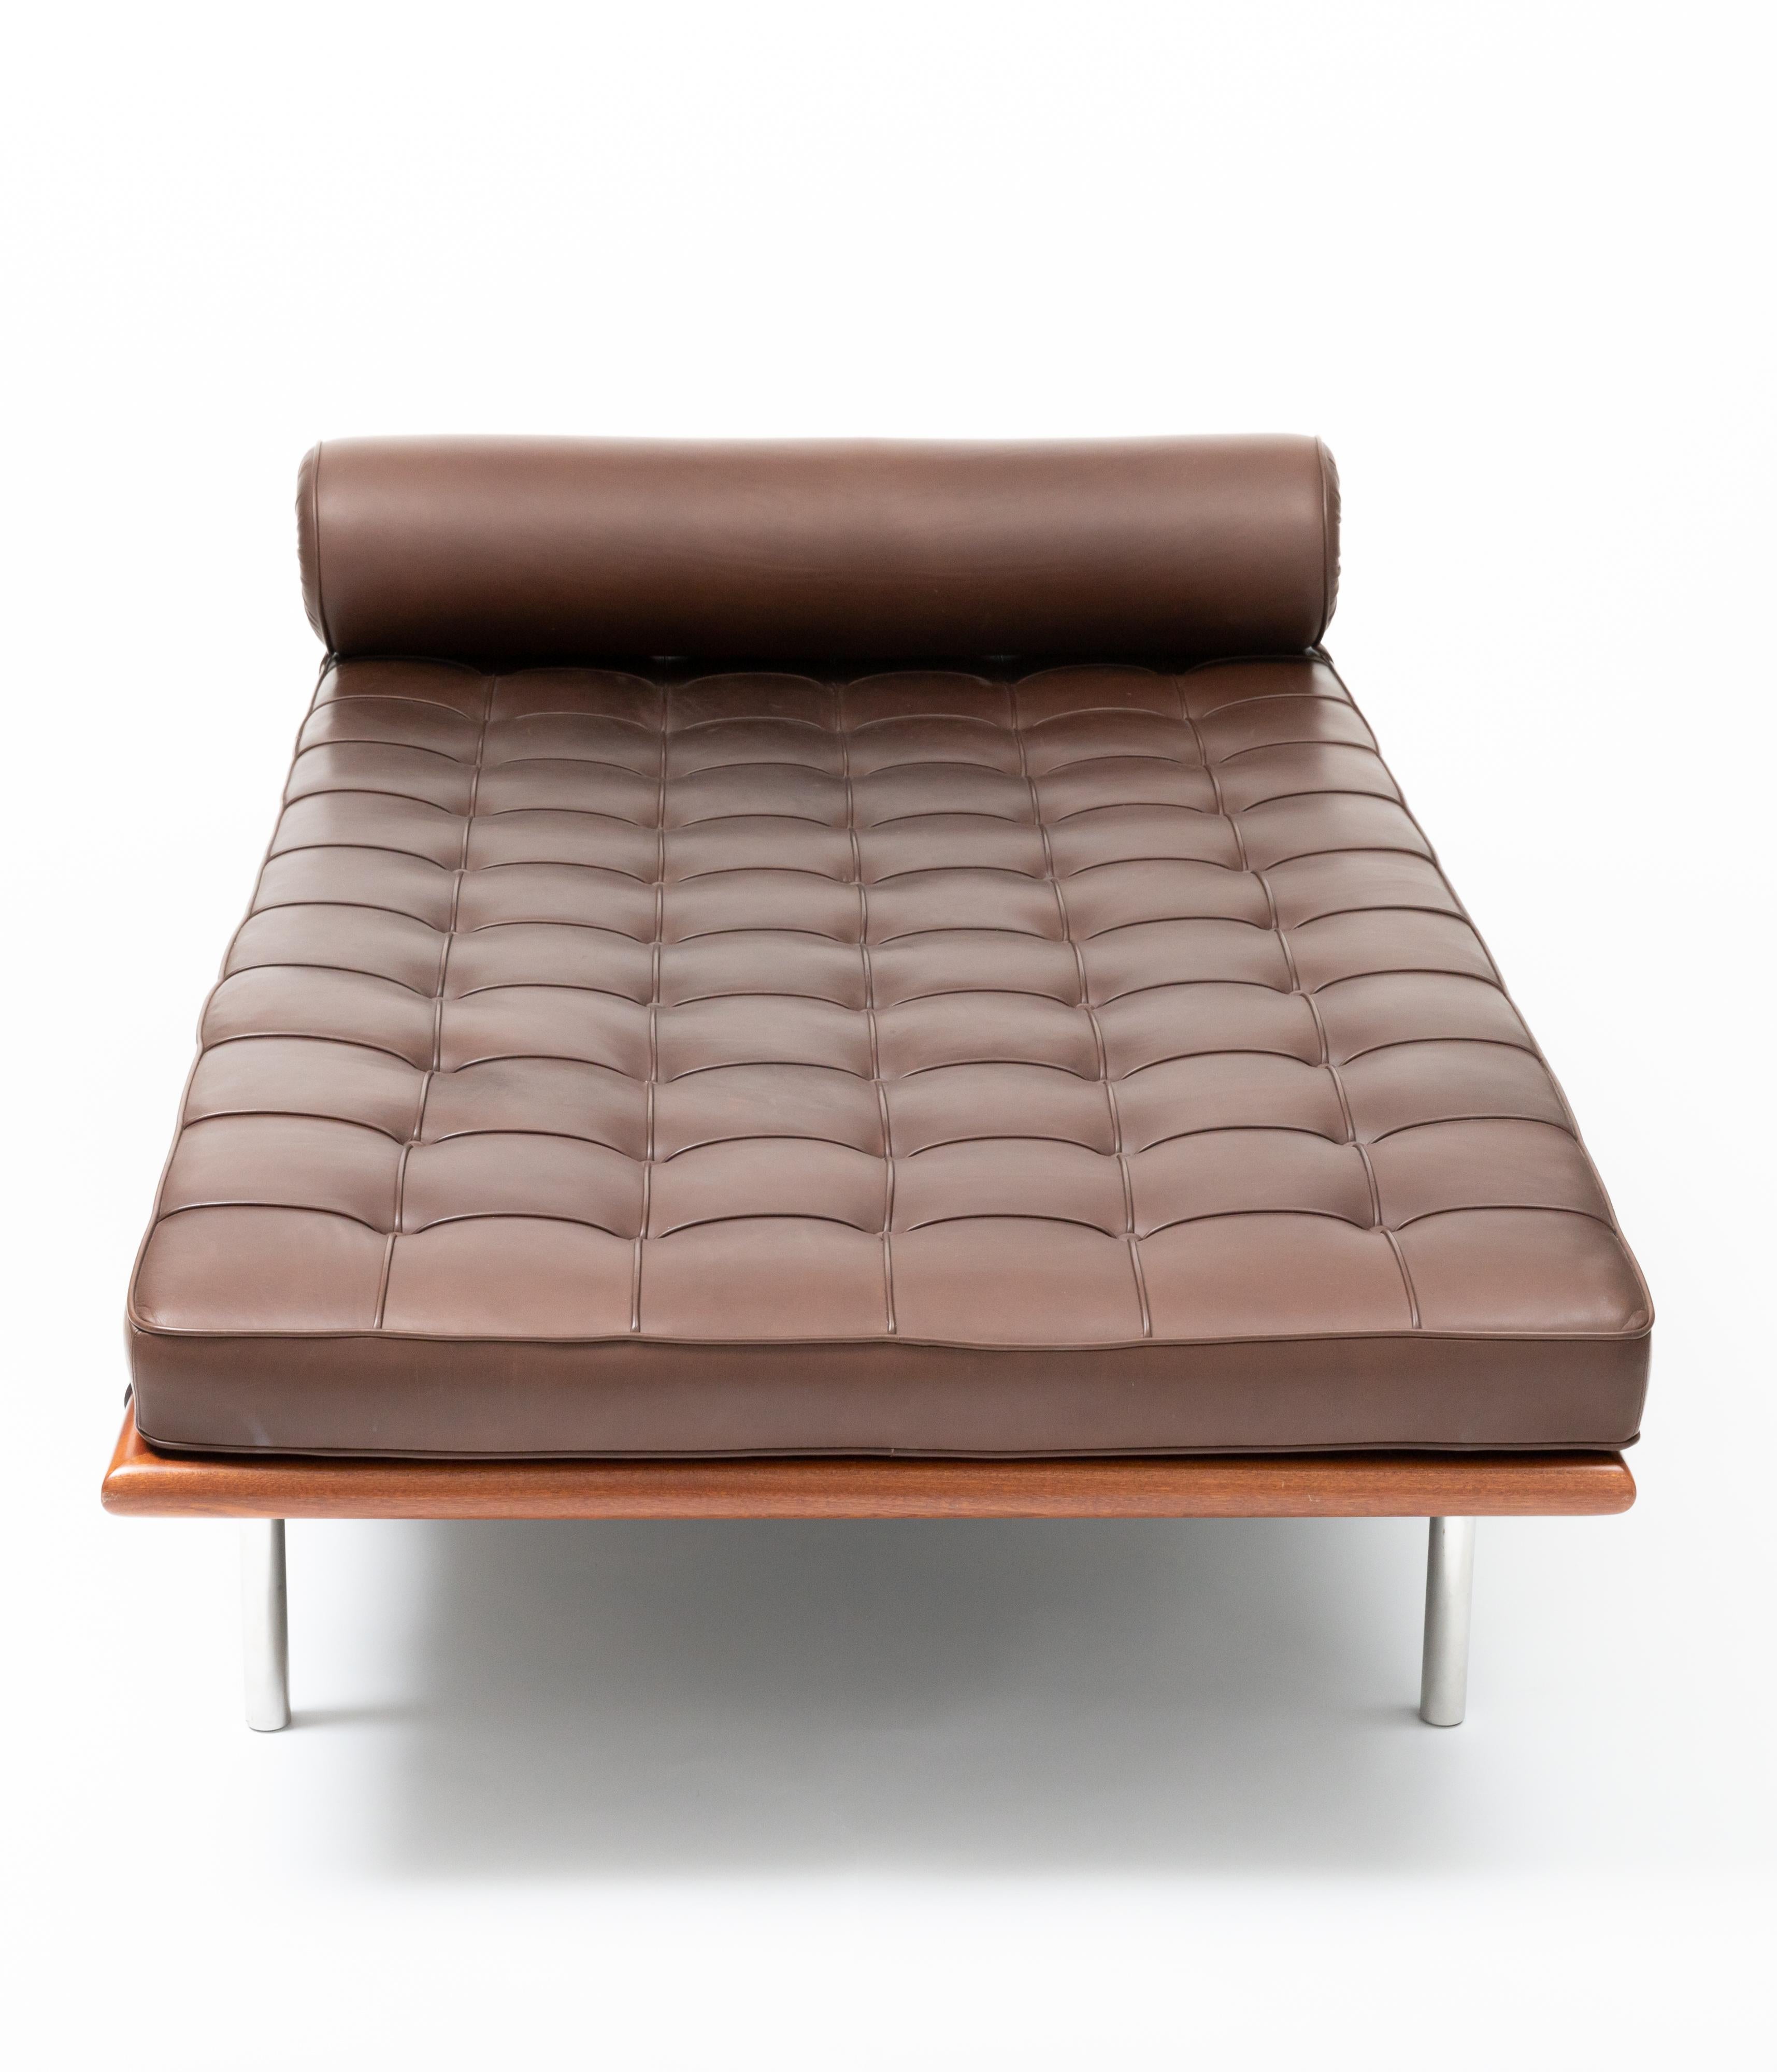 Classic Barcelona daybed by German-American architect and designer Ludwig Mies van der Rohe. This sleek daybed shares the same simple and refined elegance as the iconic lounge chair of the same name and is a stunning example of twentieth century